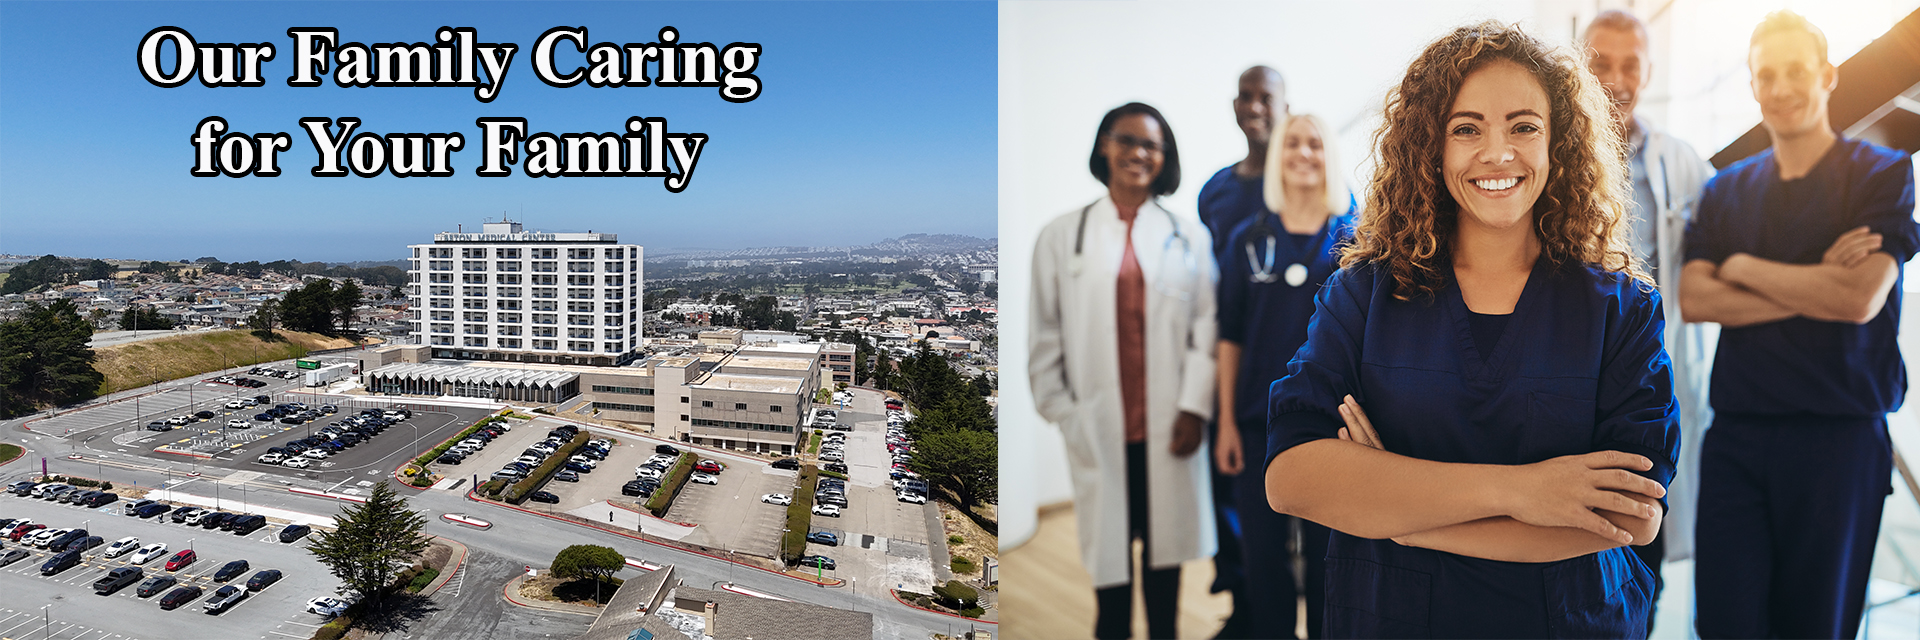 Our Family Caring for Your Family. SETON MEDICAL CENTER